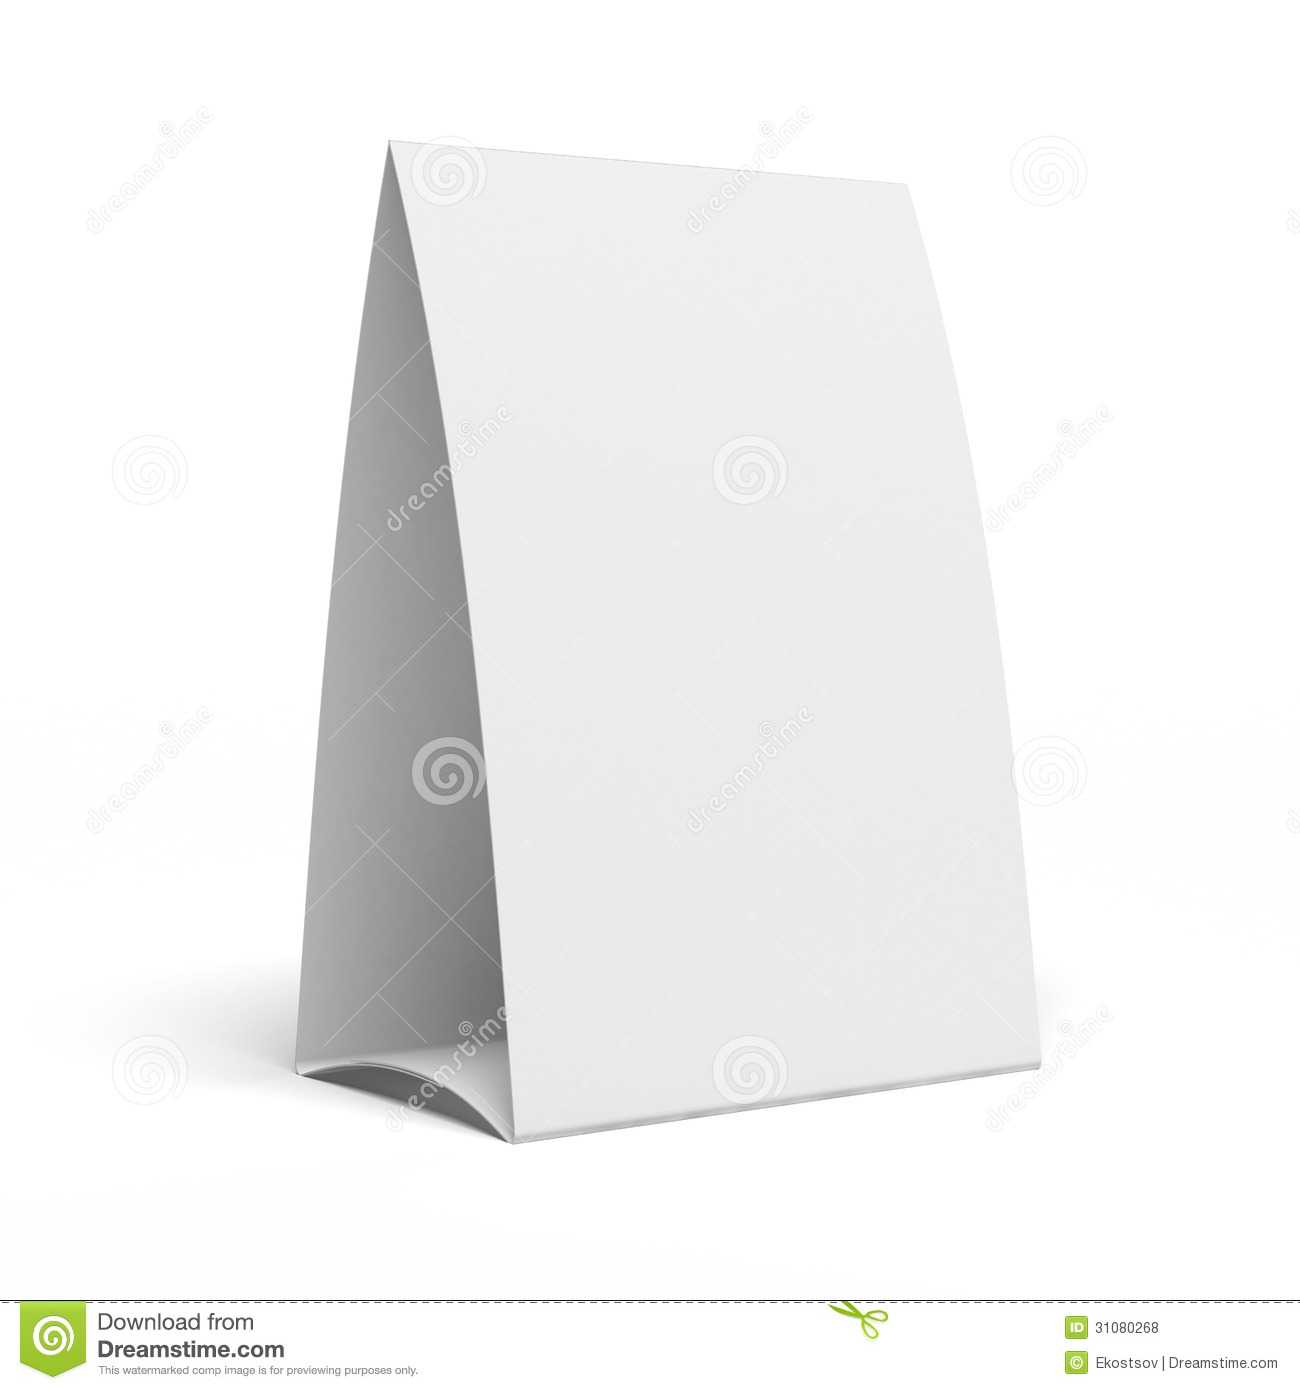 Table Tent Stock Illustration. Illustration Of Showcase Inside Reserved Cards For Tables Templates